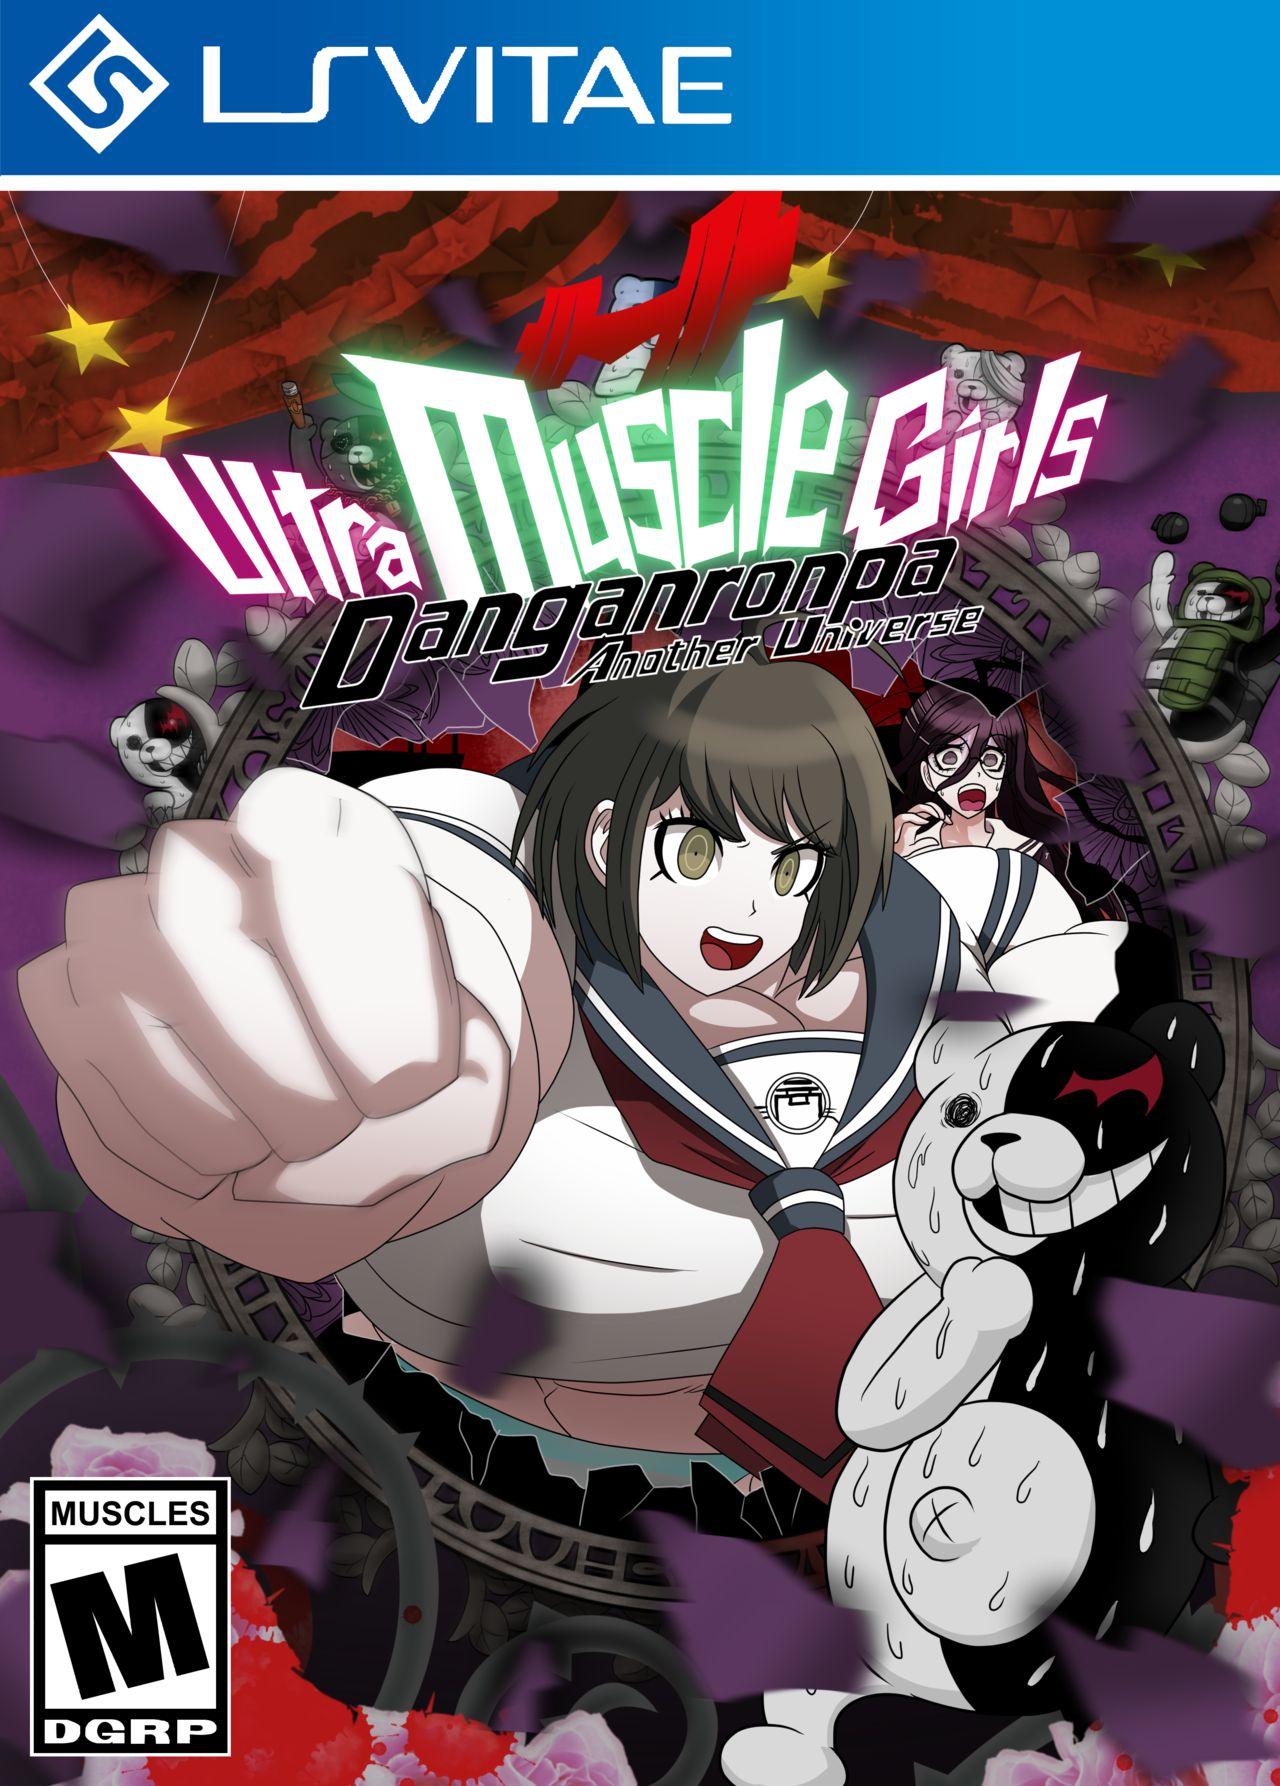 Free Hardcore Porn Ultra Muscle Girl - Danganronpa With - Page 1